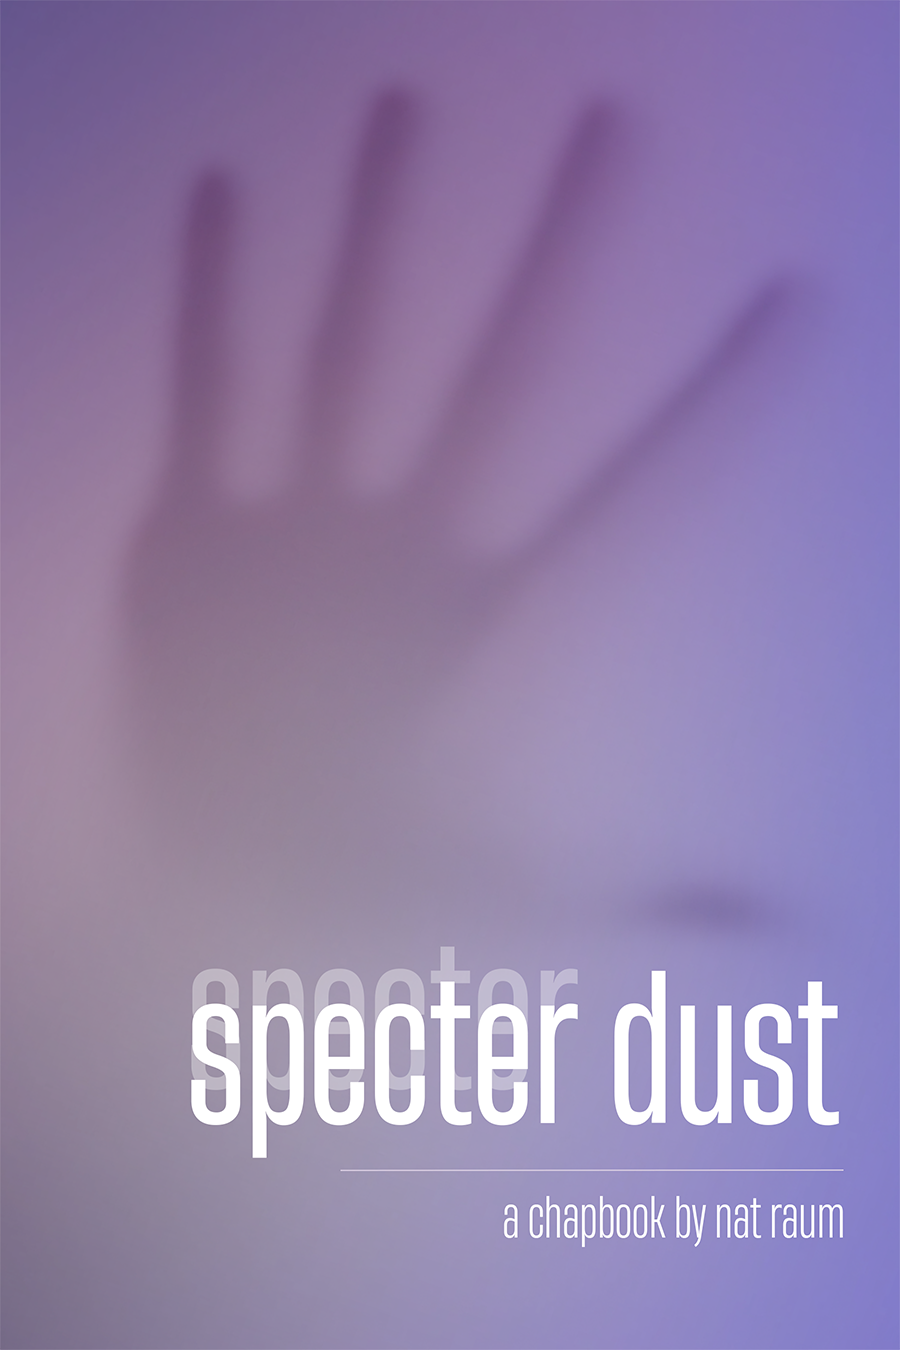 Book cover of specter dust by nat raum